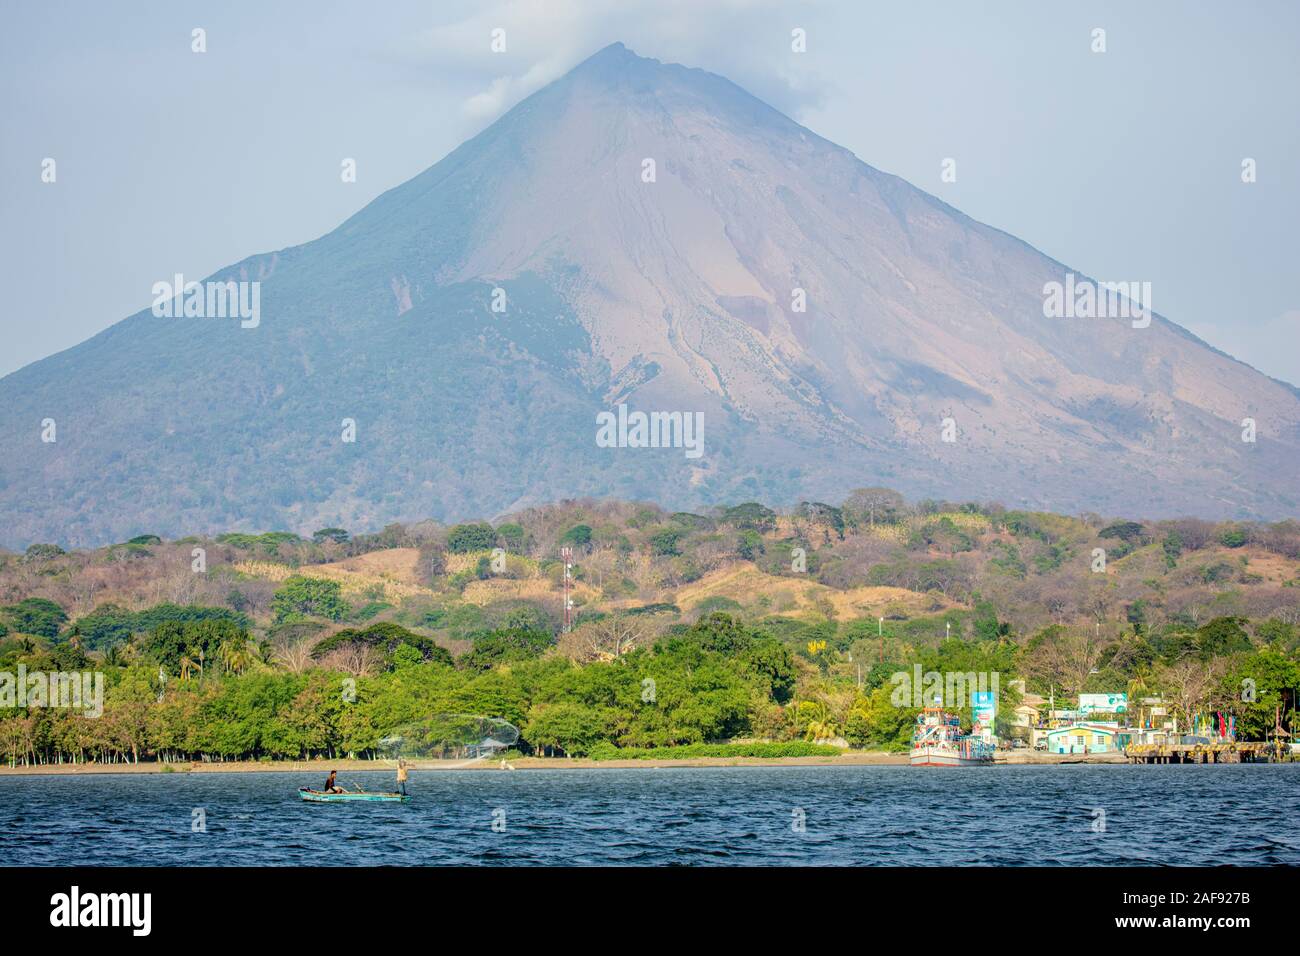 View of Concepcion volcano and the shoreline of Ometepe Island in Lake Nicaragua, Central America Stock Photo